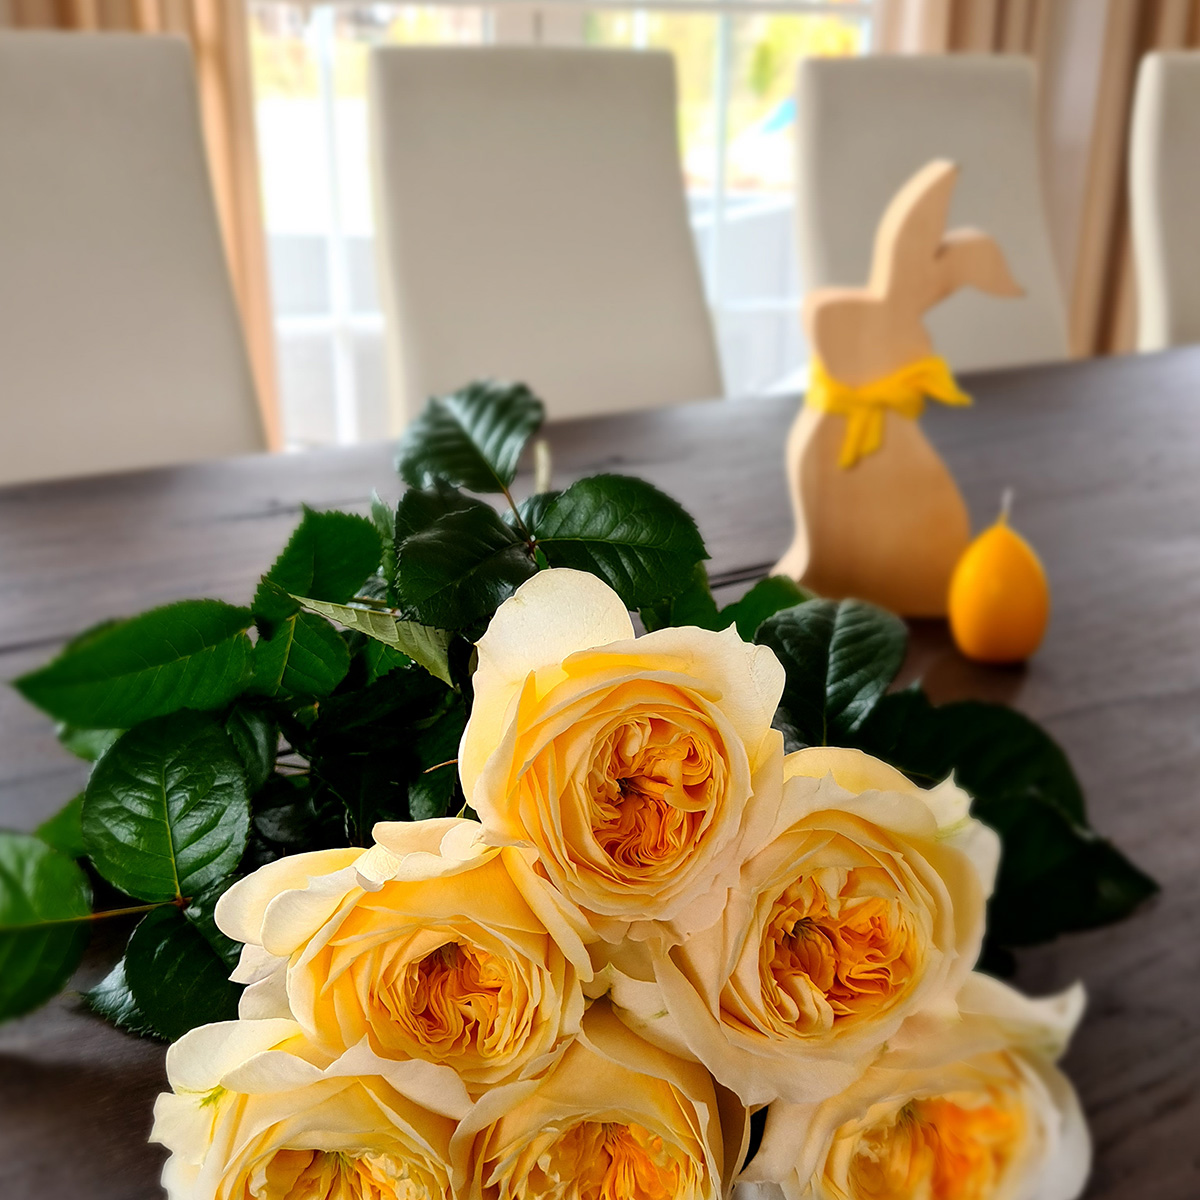 rose-persuasion-the-yellow-royal-beauty-featured